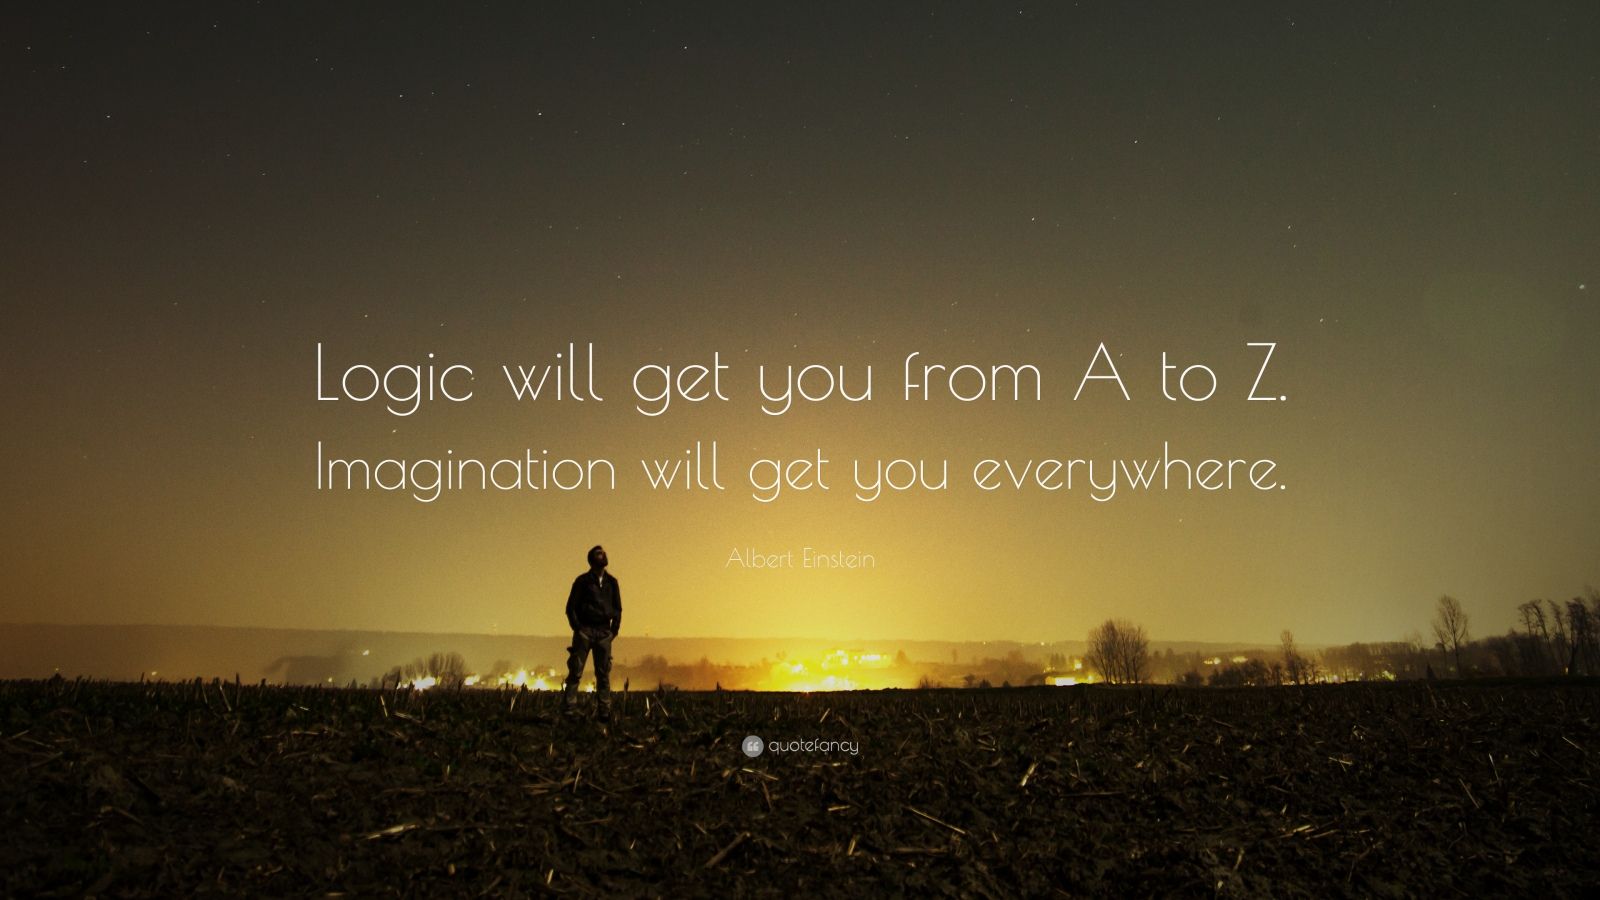 Albert Einstein Quote: “Logic will get you from A to Z. Imagination